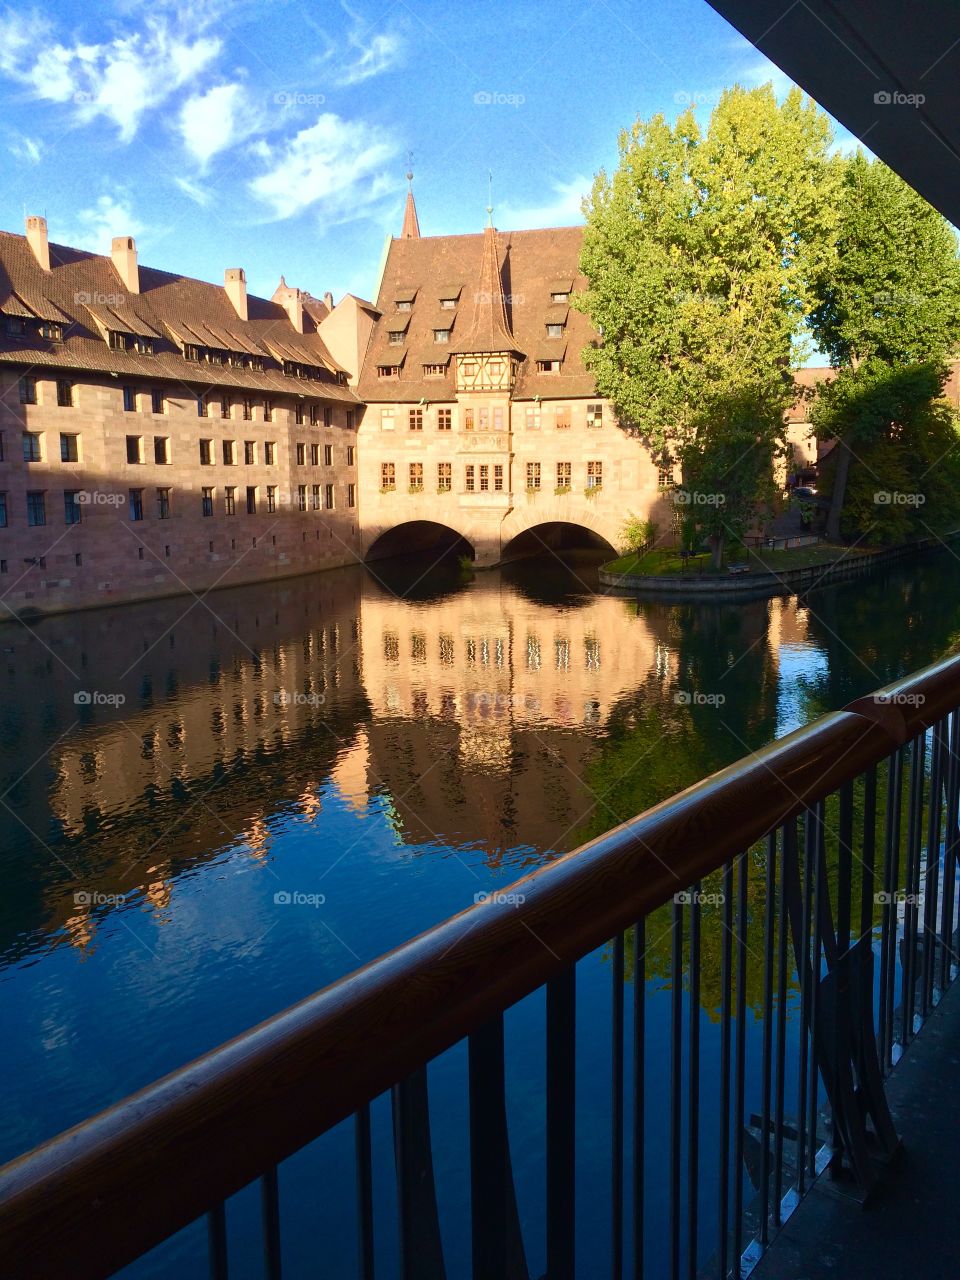 Old Building Reflecting Off The Water In Nuremberg, Germany.